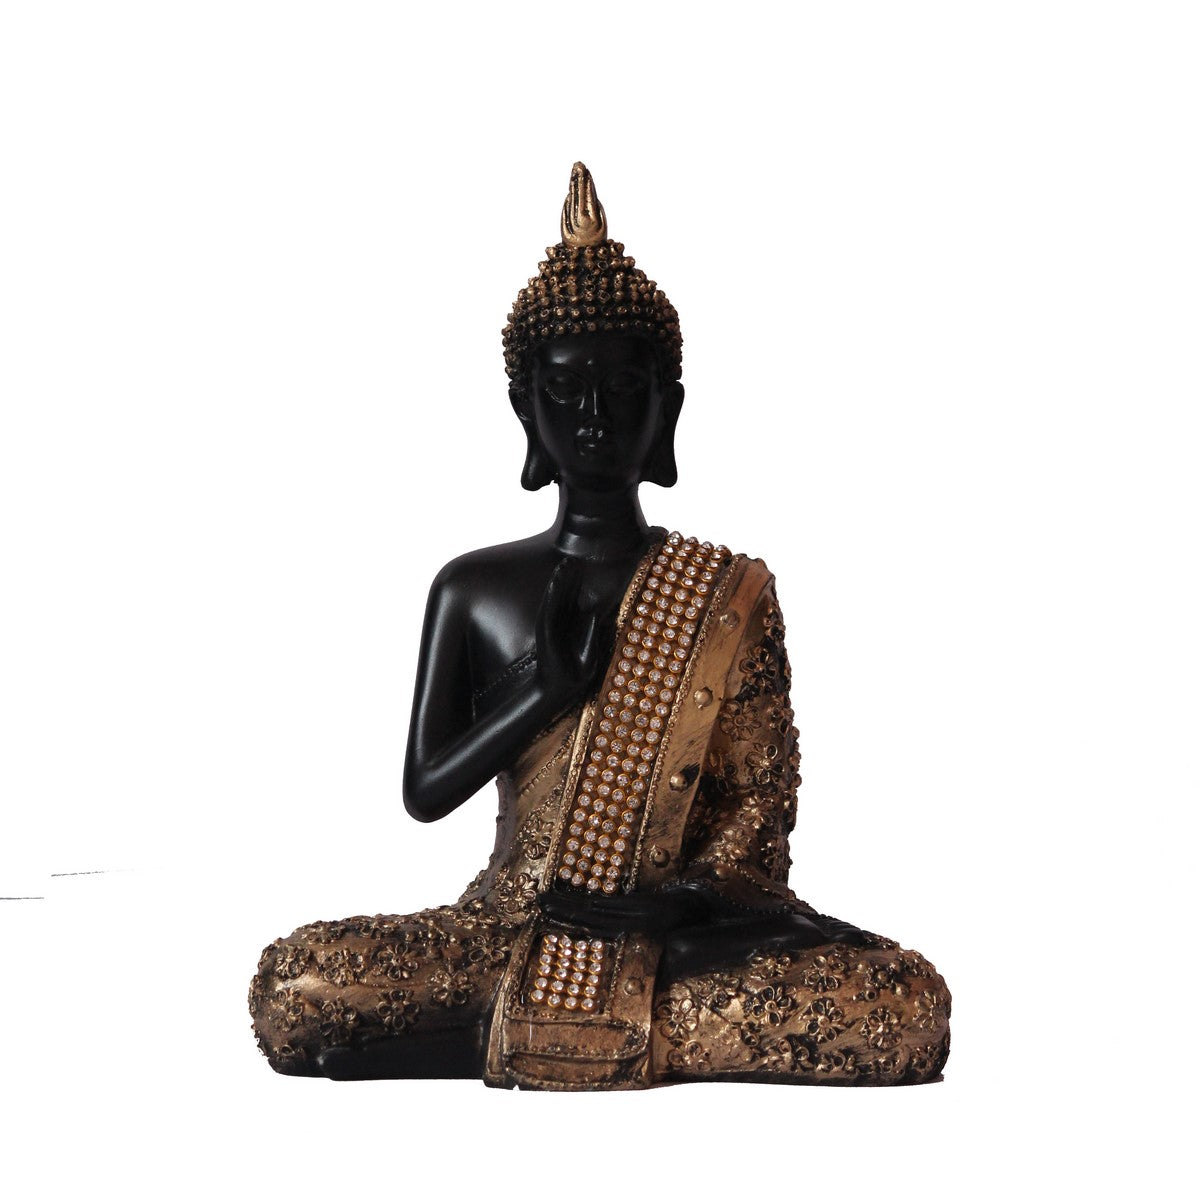 Polyresin Black and Golden Handcrafted Meditating Blessing Buddha Statue 1